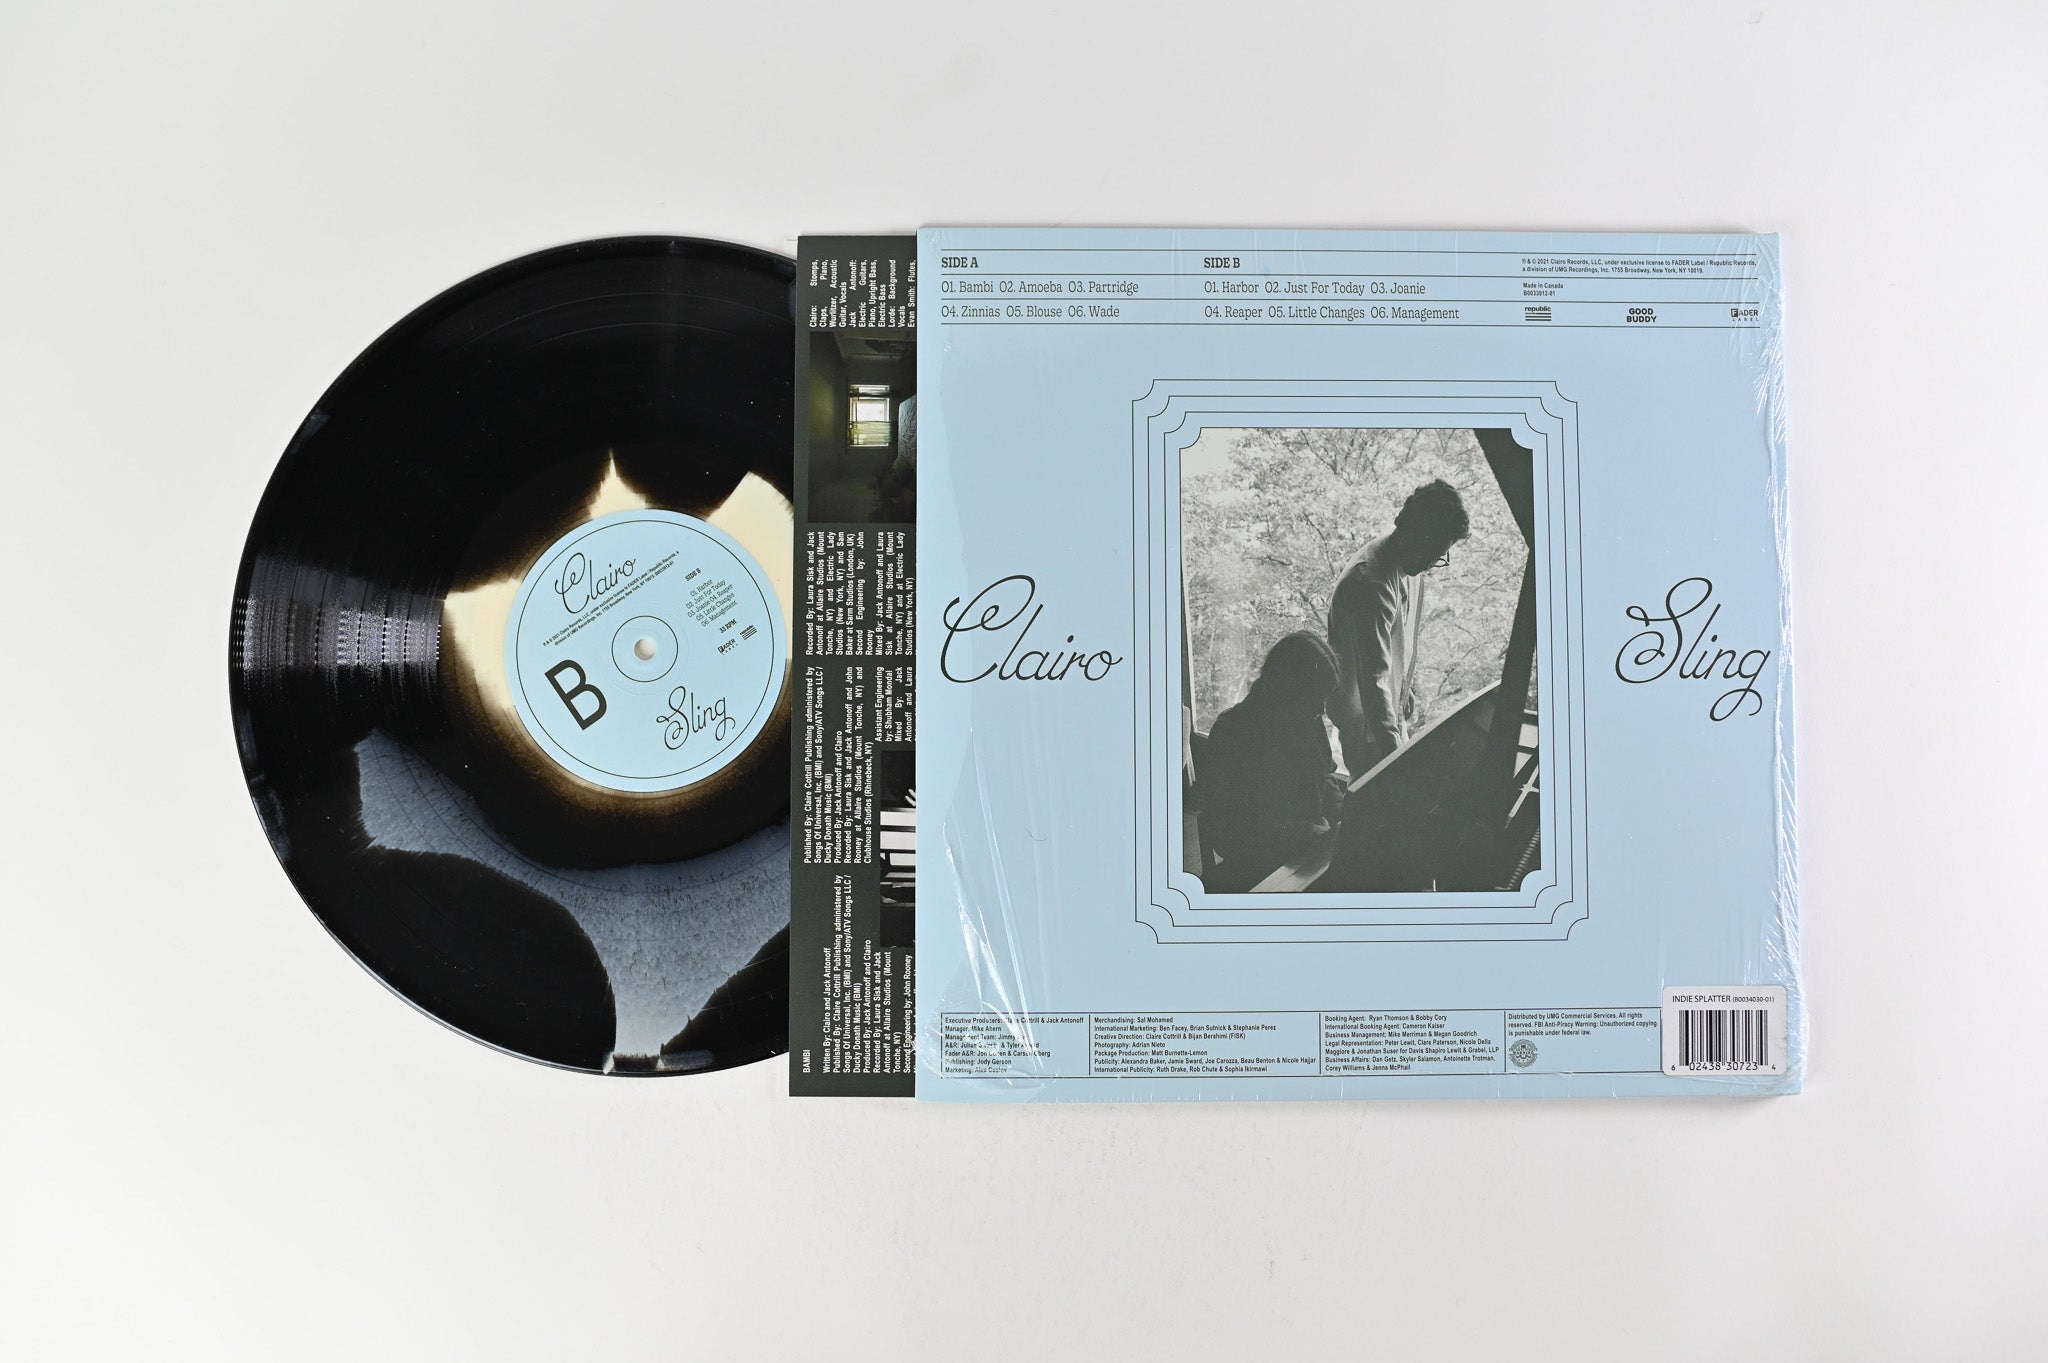 Clairo - Sling on Fader Label/Republic Records RSD Limited Edition on Black & White Swirl Vinyl